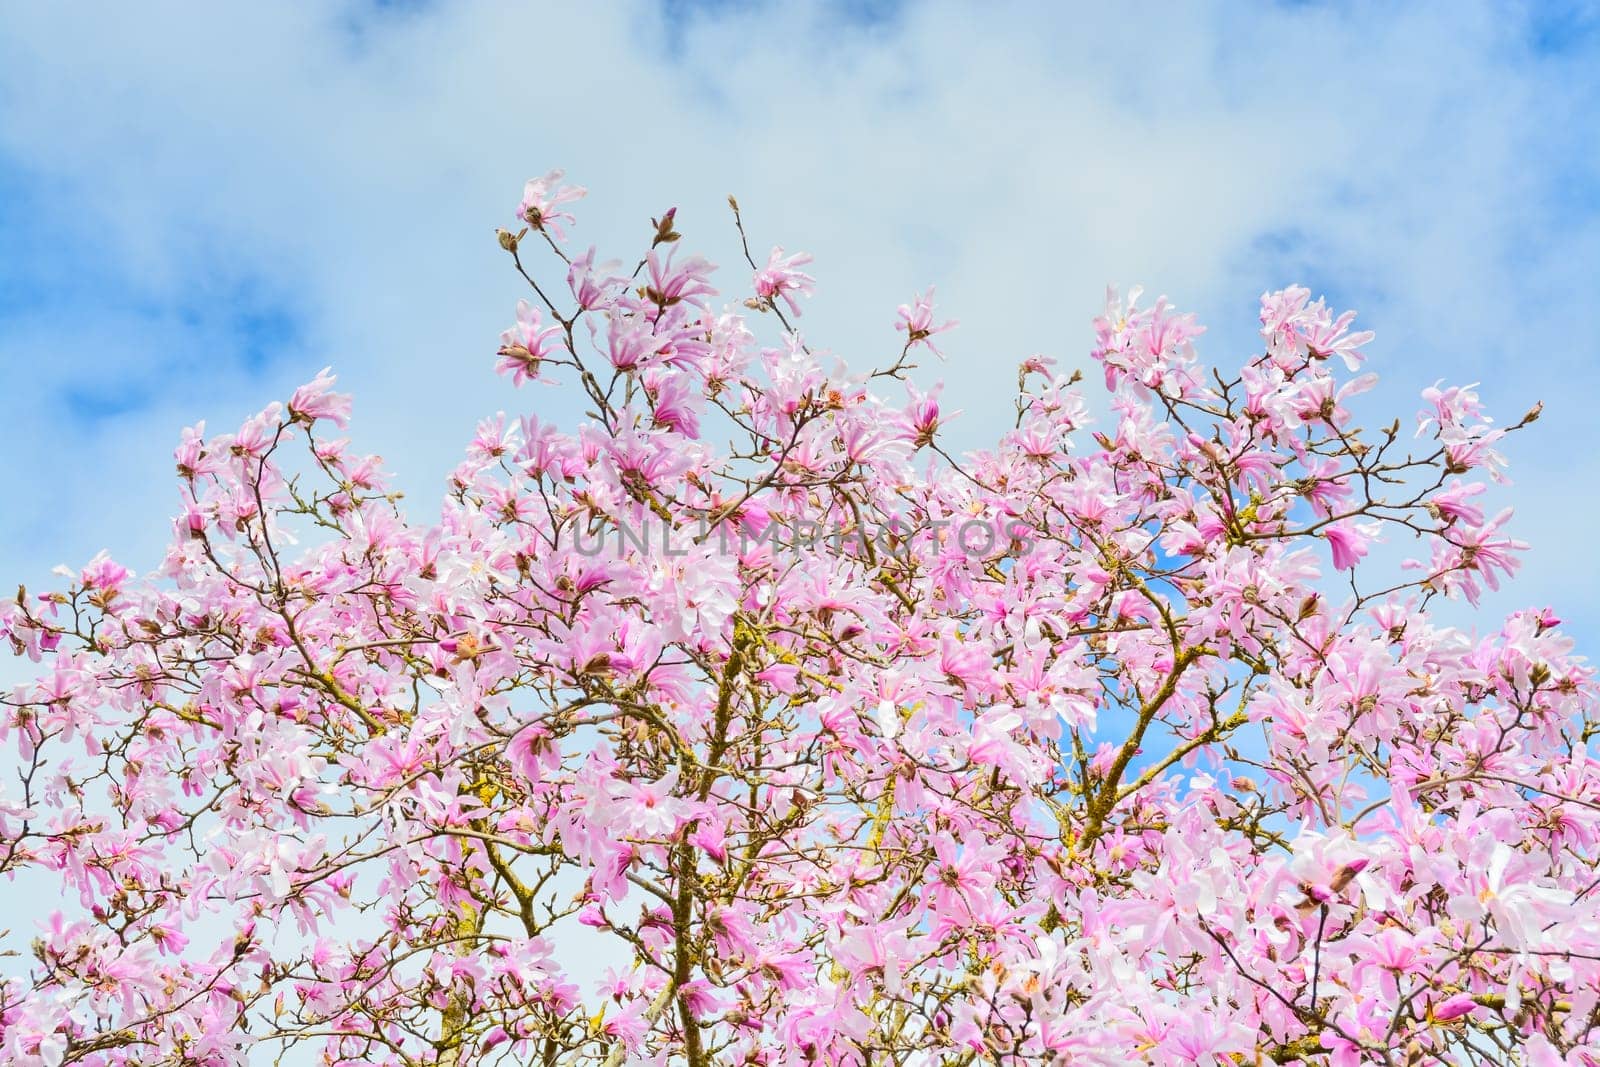 Blossoming flowers of pink magnolia on blue and white sky background by Imagenet